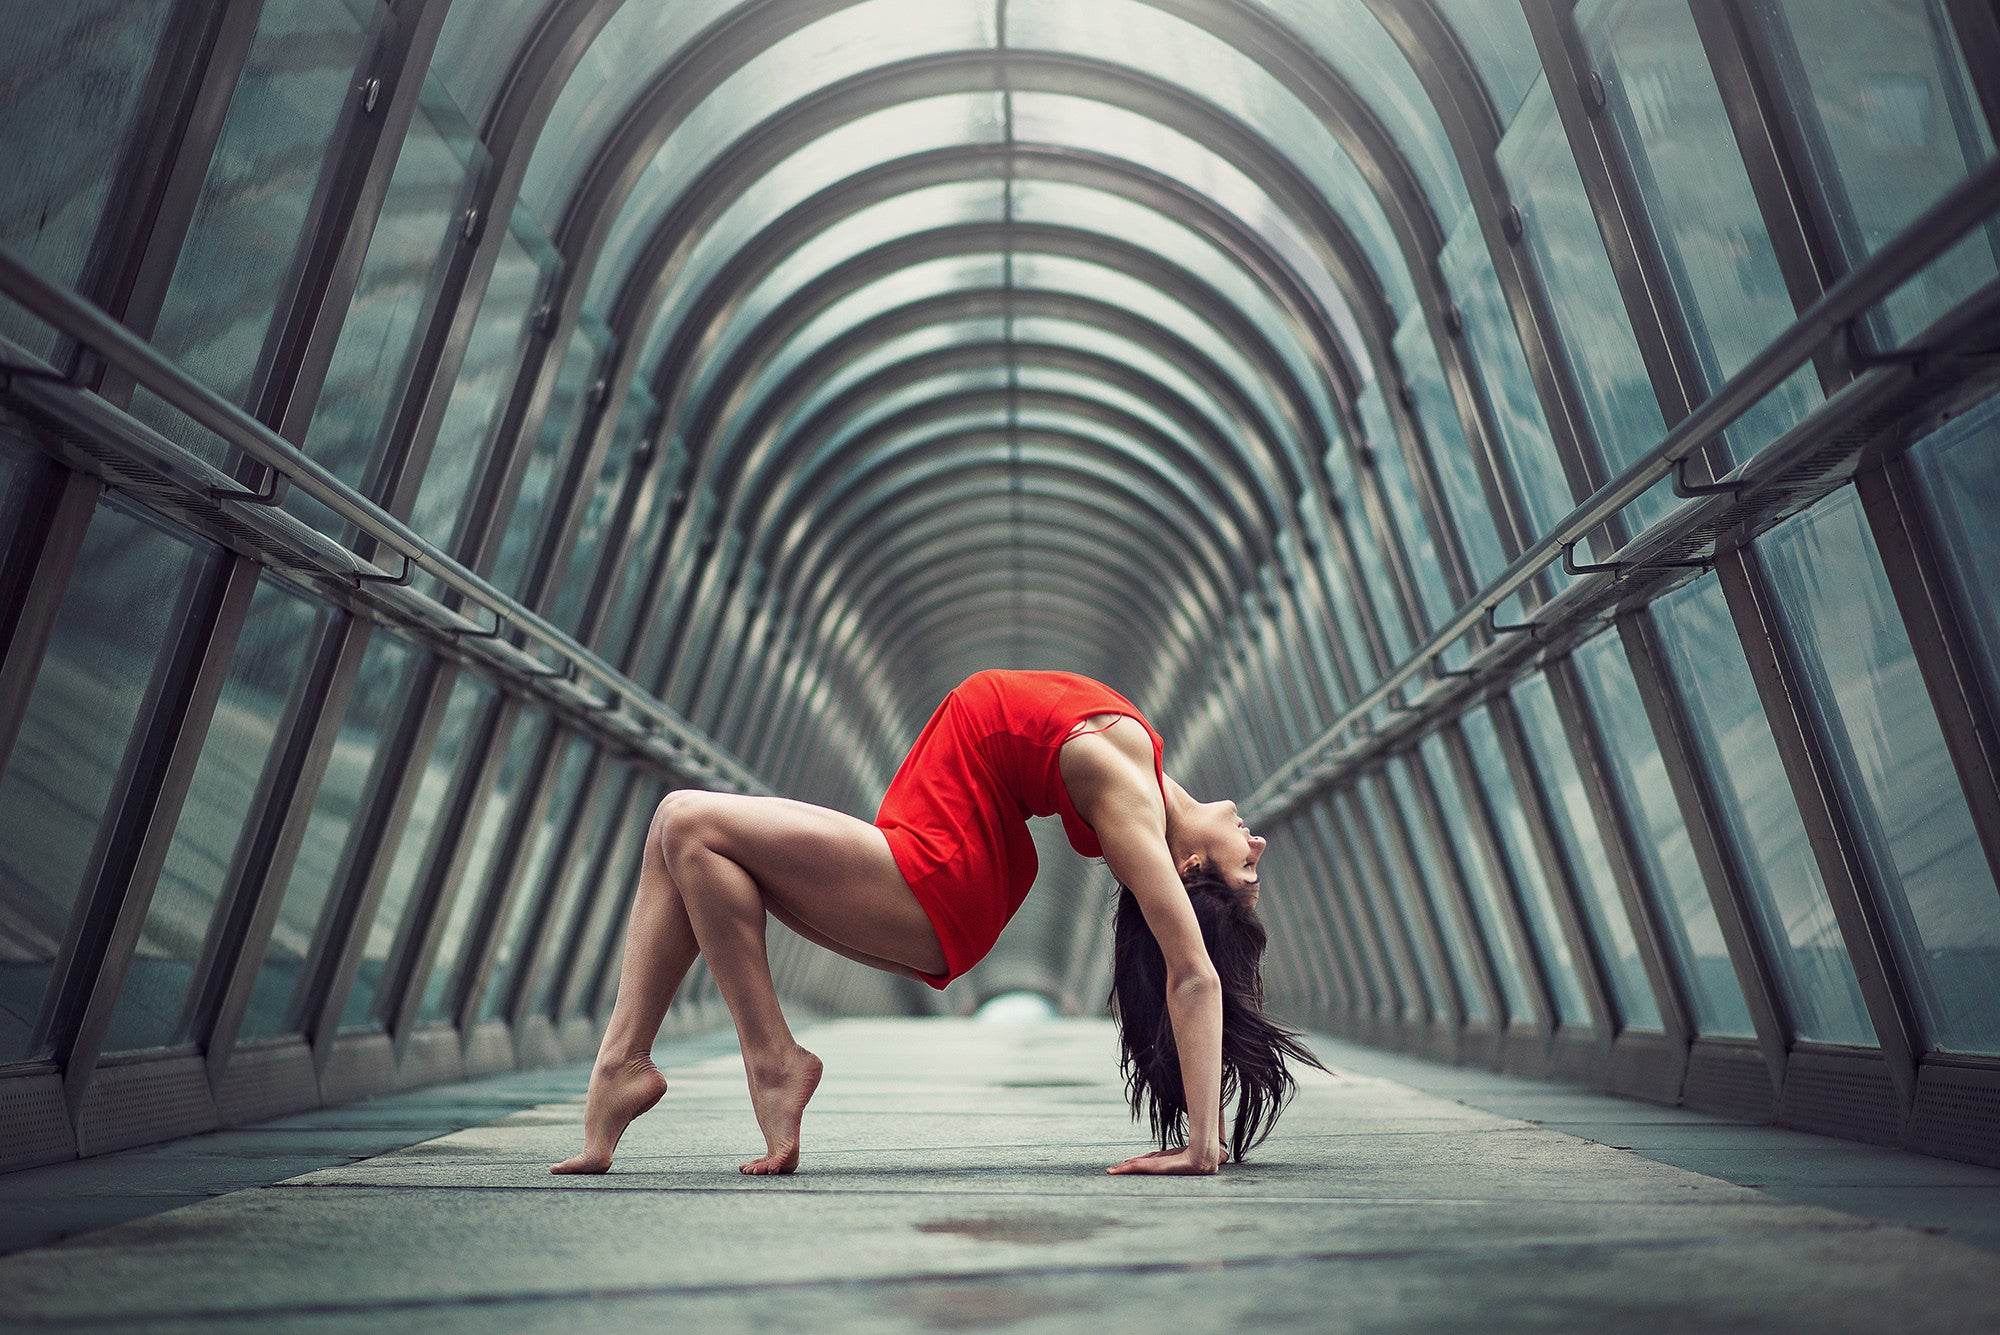 Art Dance Photography Prints - Purchase Online the artwork: Red 2.0 by Dimitry Roulland